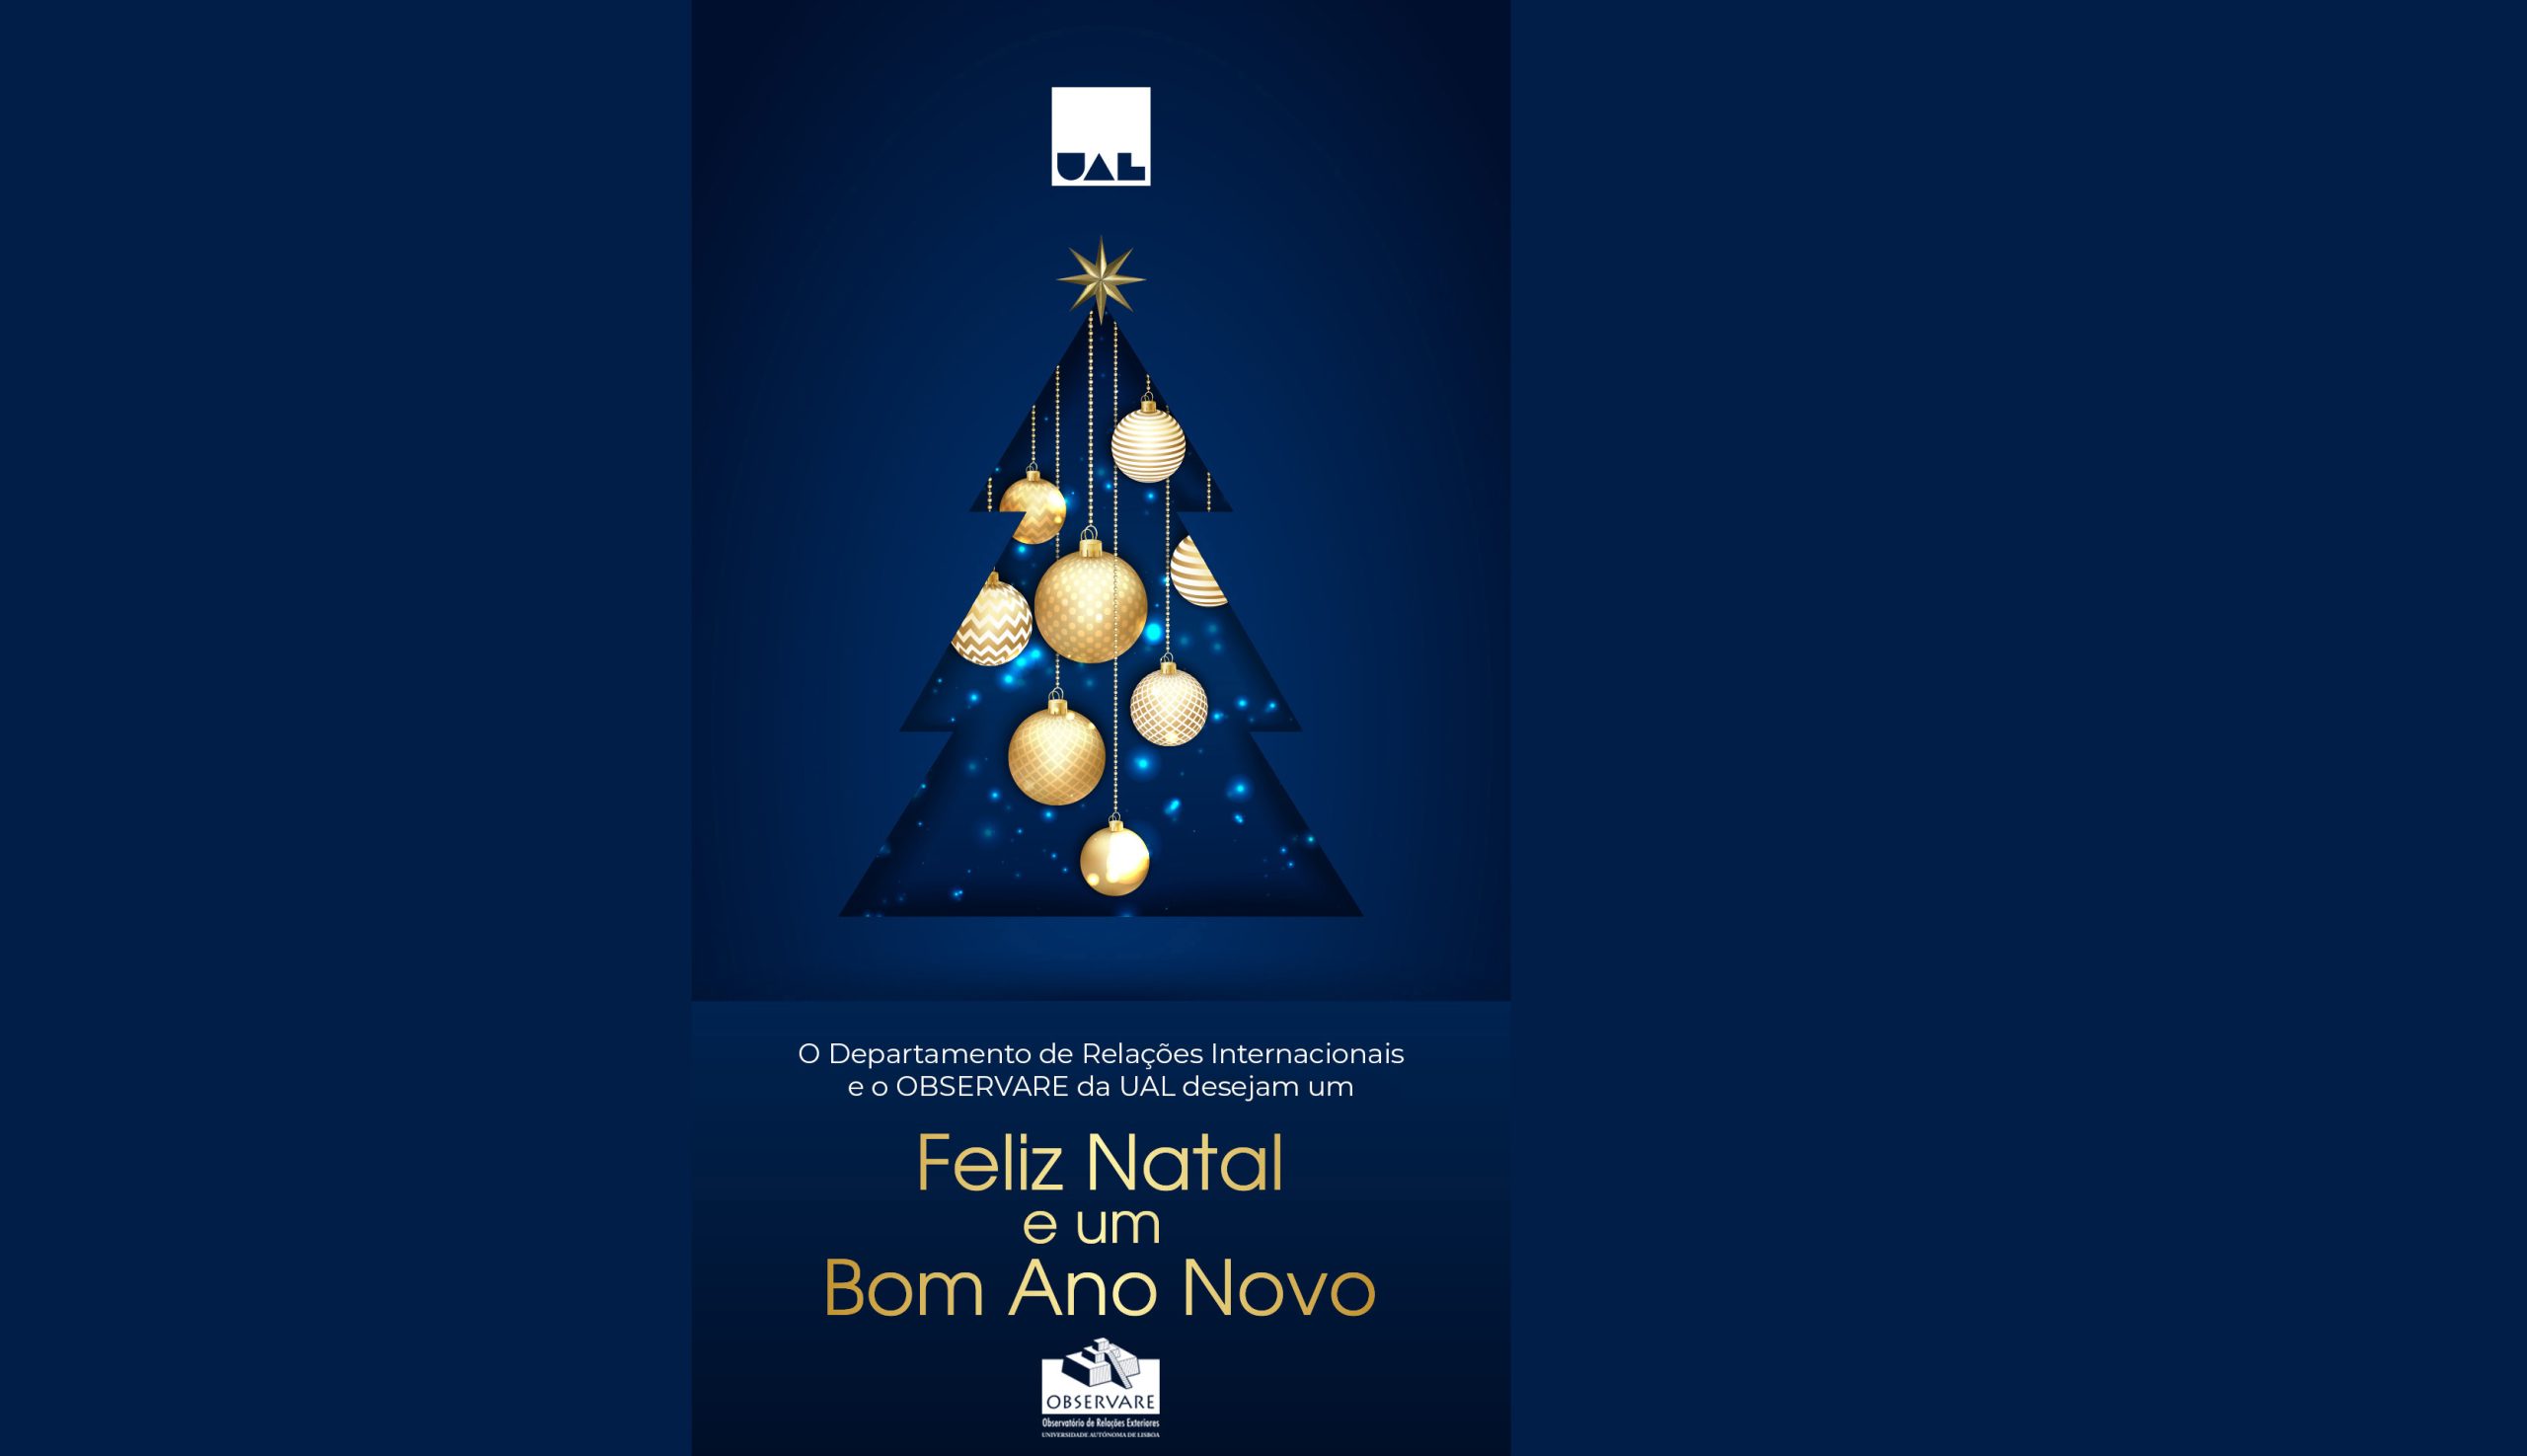 The International Relations Department and OBSERVARE of the UAL wish you a Merry Christmas and an Excellent 2023